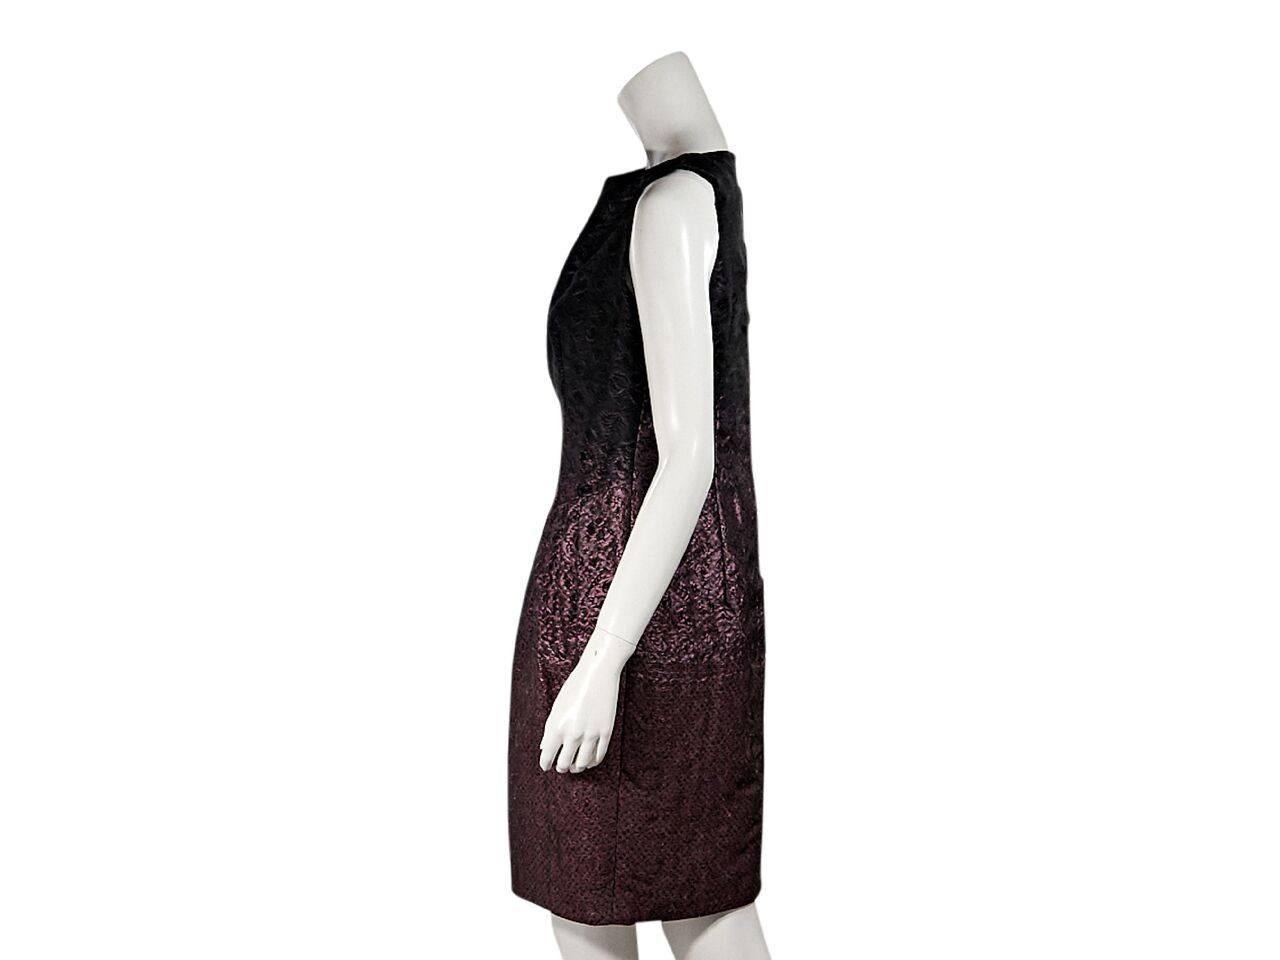 Product details:  Black and metallic purple woven dress by Escada.  Boatneck.  Sleeveless.  Side pleats.  Concealed back zip closure.  
Condition: Pre-owned. Very good.
Est. Retail $ 750.00